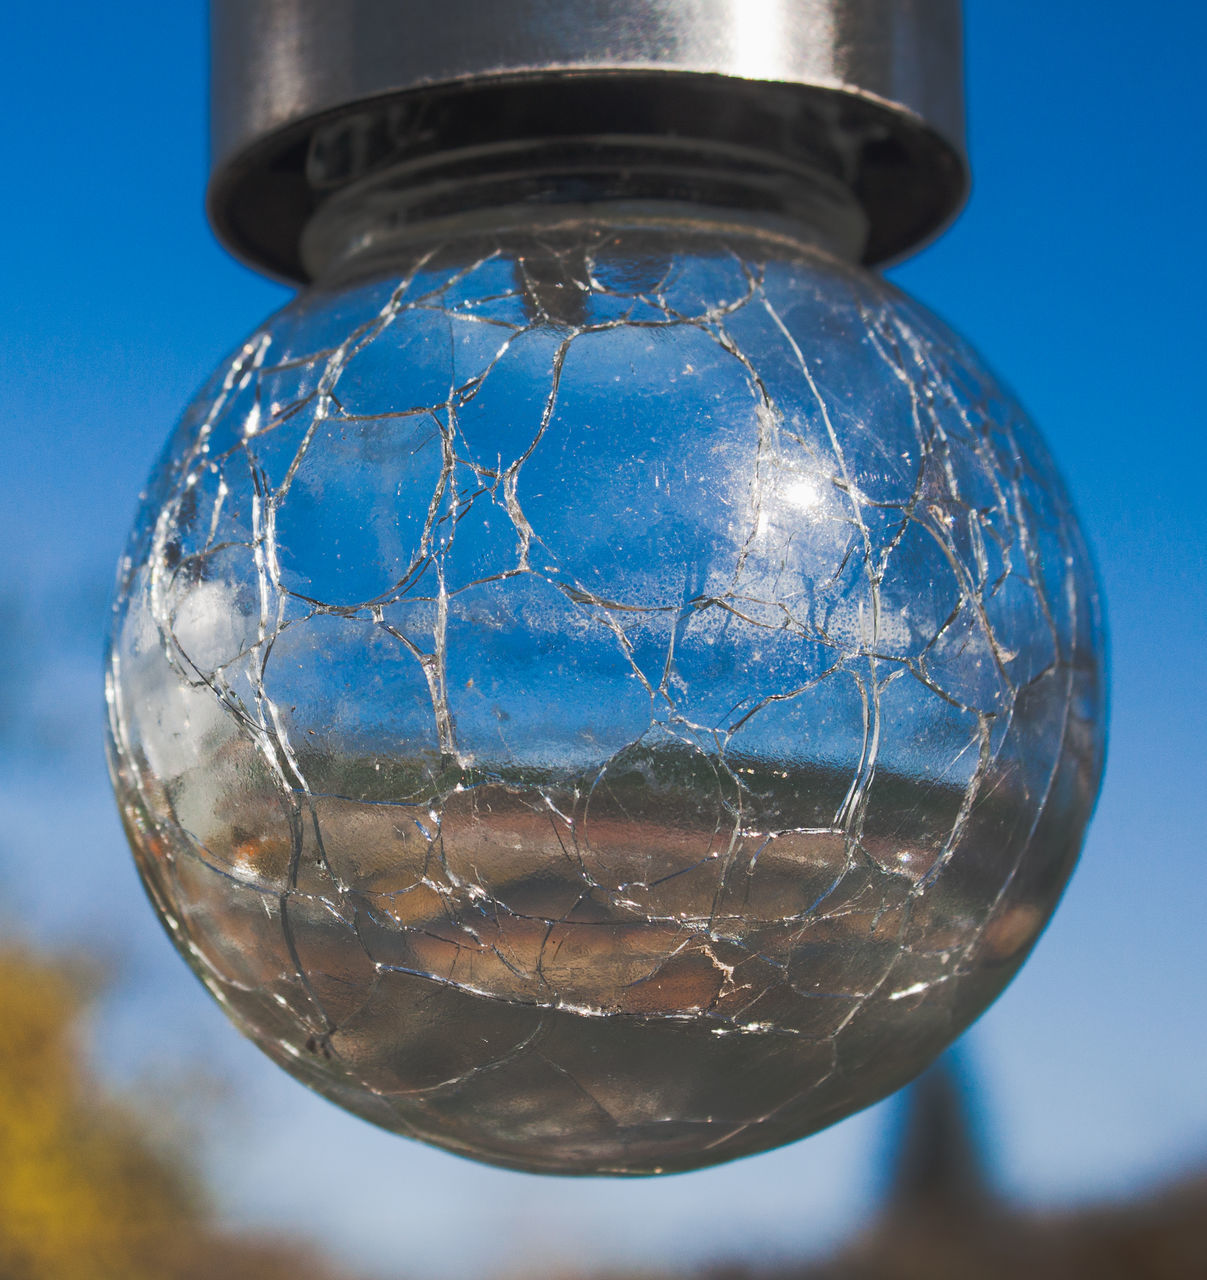 CLOSE-UP OF GLASS BALL AGAINST BLUE BACKGROUND